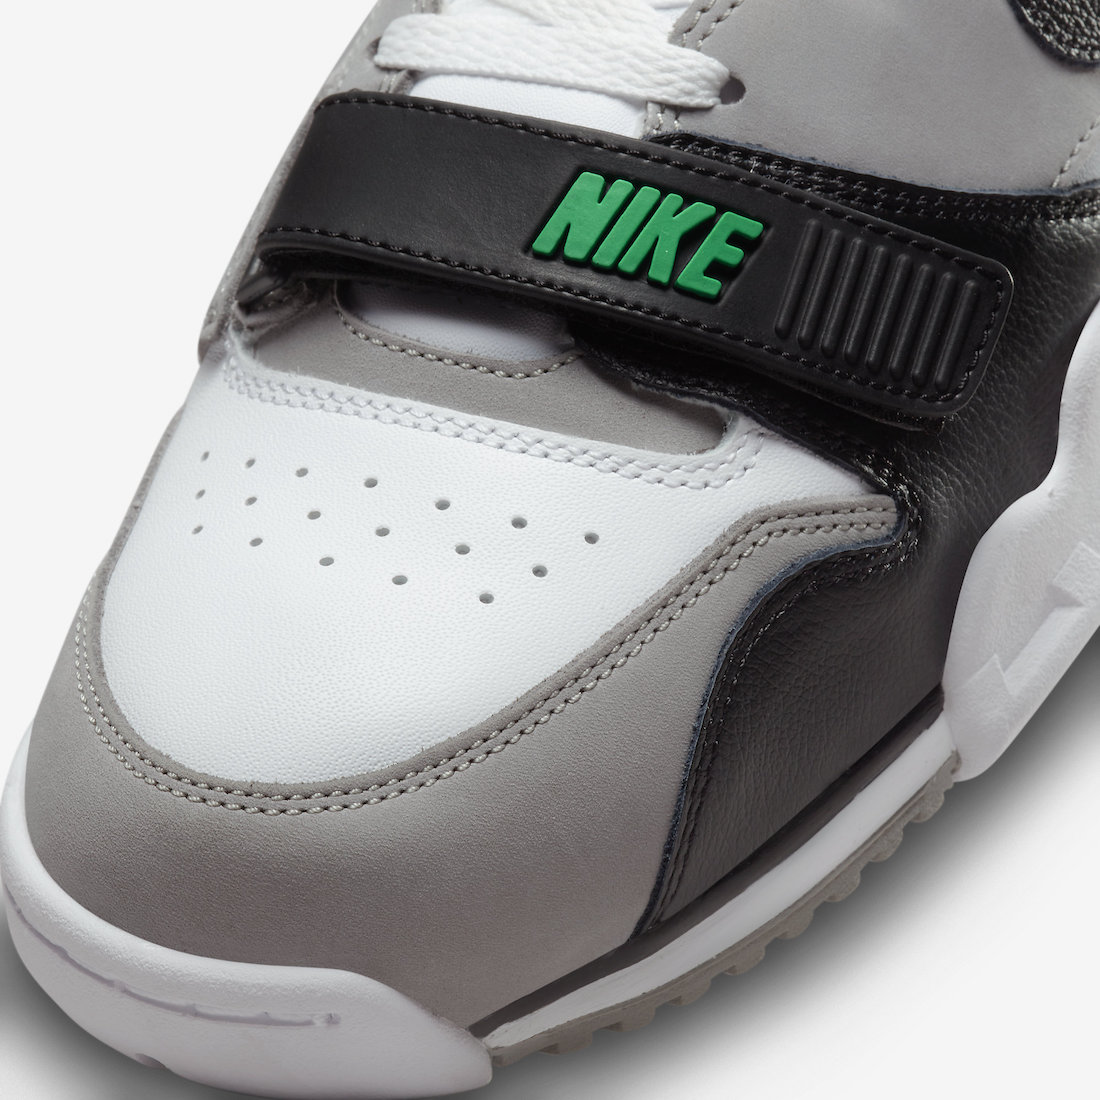 Nike-Air-Trainer-1-Mid-Chlorophyll-2022-DM0521-100-Release-Date-6